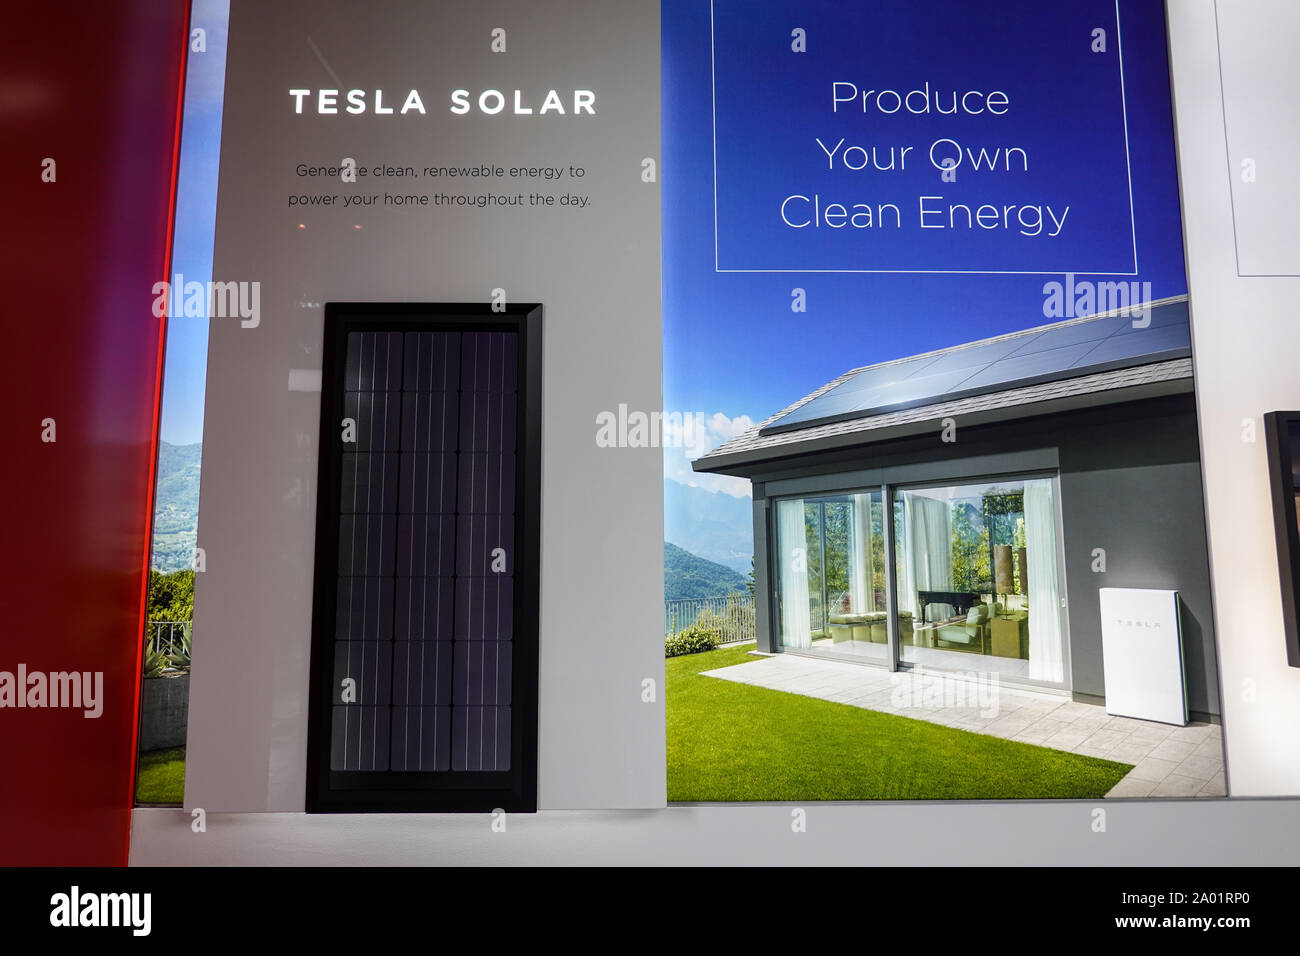 Seattle,WA/USA-9/15/29: A Tesla Solar panel at the Tesla dealership in Seattle, WA.  Tesla, Inc. is an American automotive and energy company that spe Stock Photo